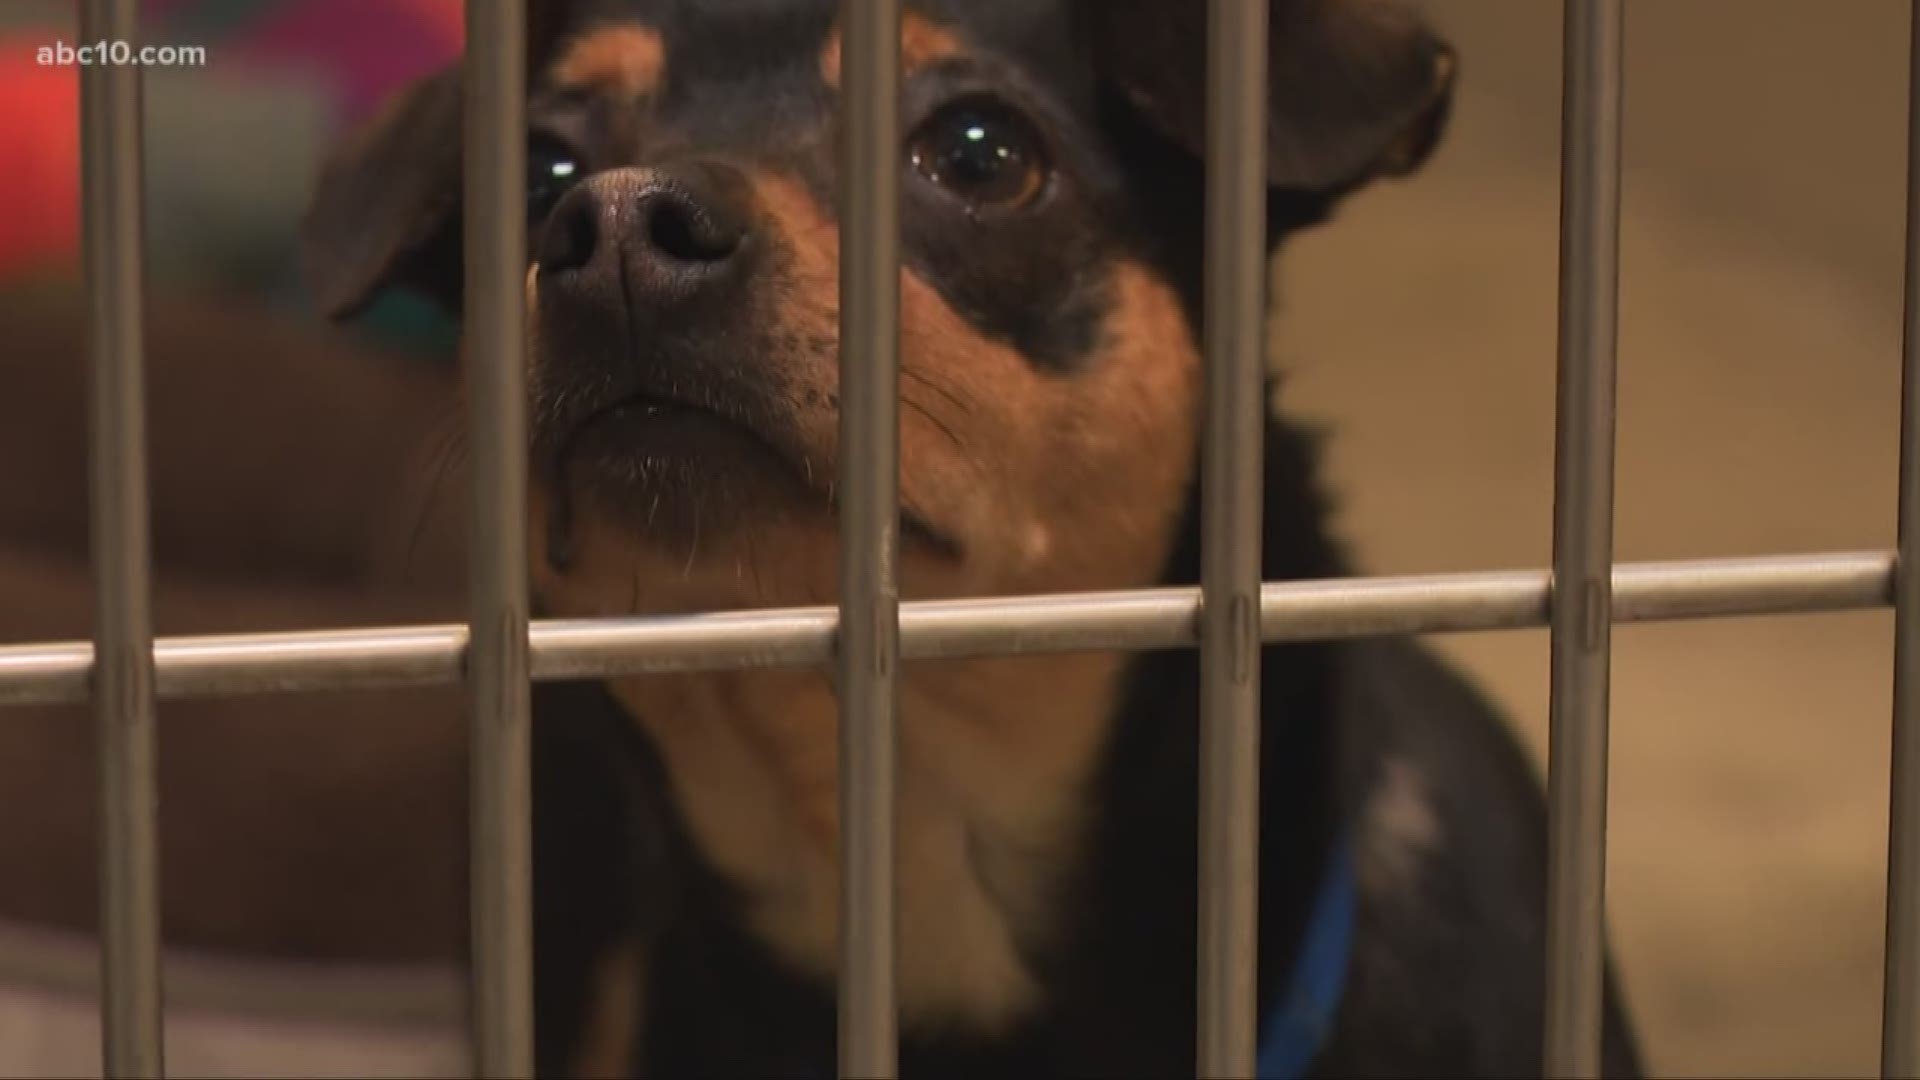 The ongoing coronavirus pandemic hasn't changed the fact that the Sacramento SPCA is still full of animals awaiting adoption.